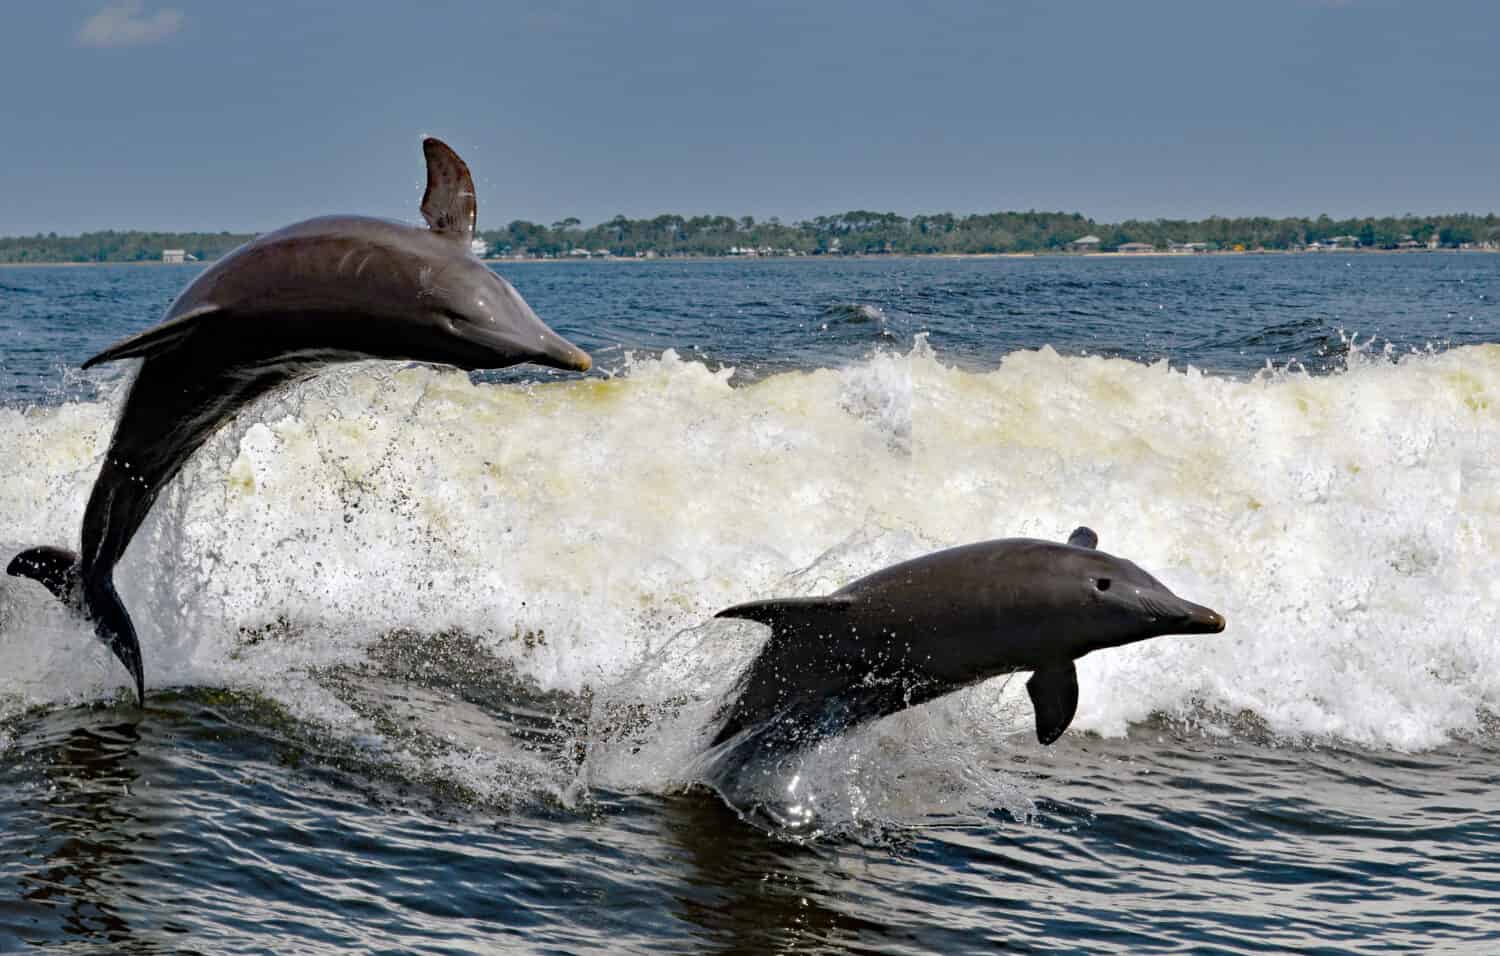 To the delight of vacationers from around the world, dolphins frolic in the bays of the Alabama Gulf Coast.